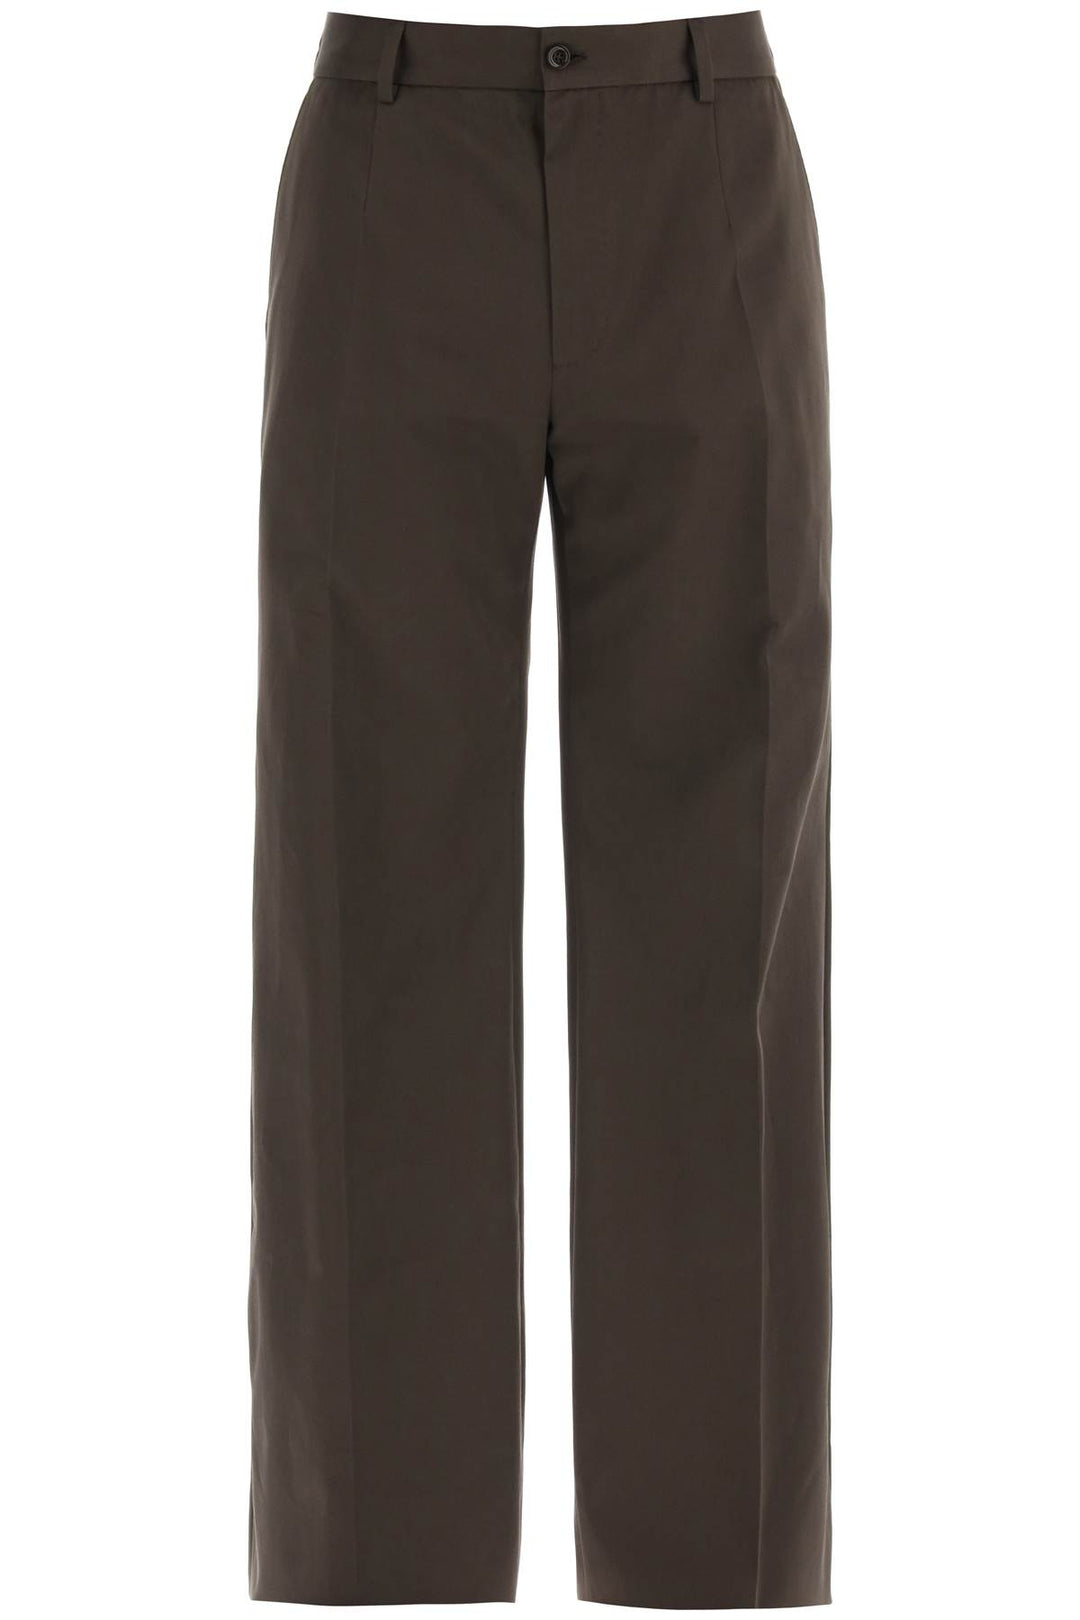 Dolce & gabbana tailored cotton trousers for men-0